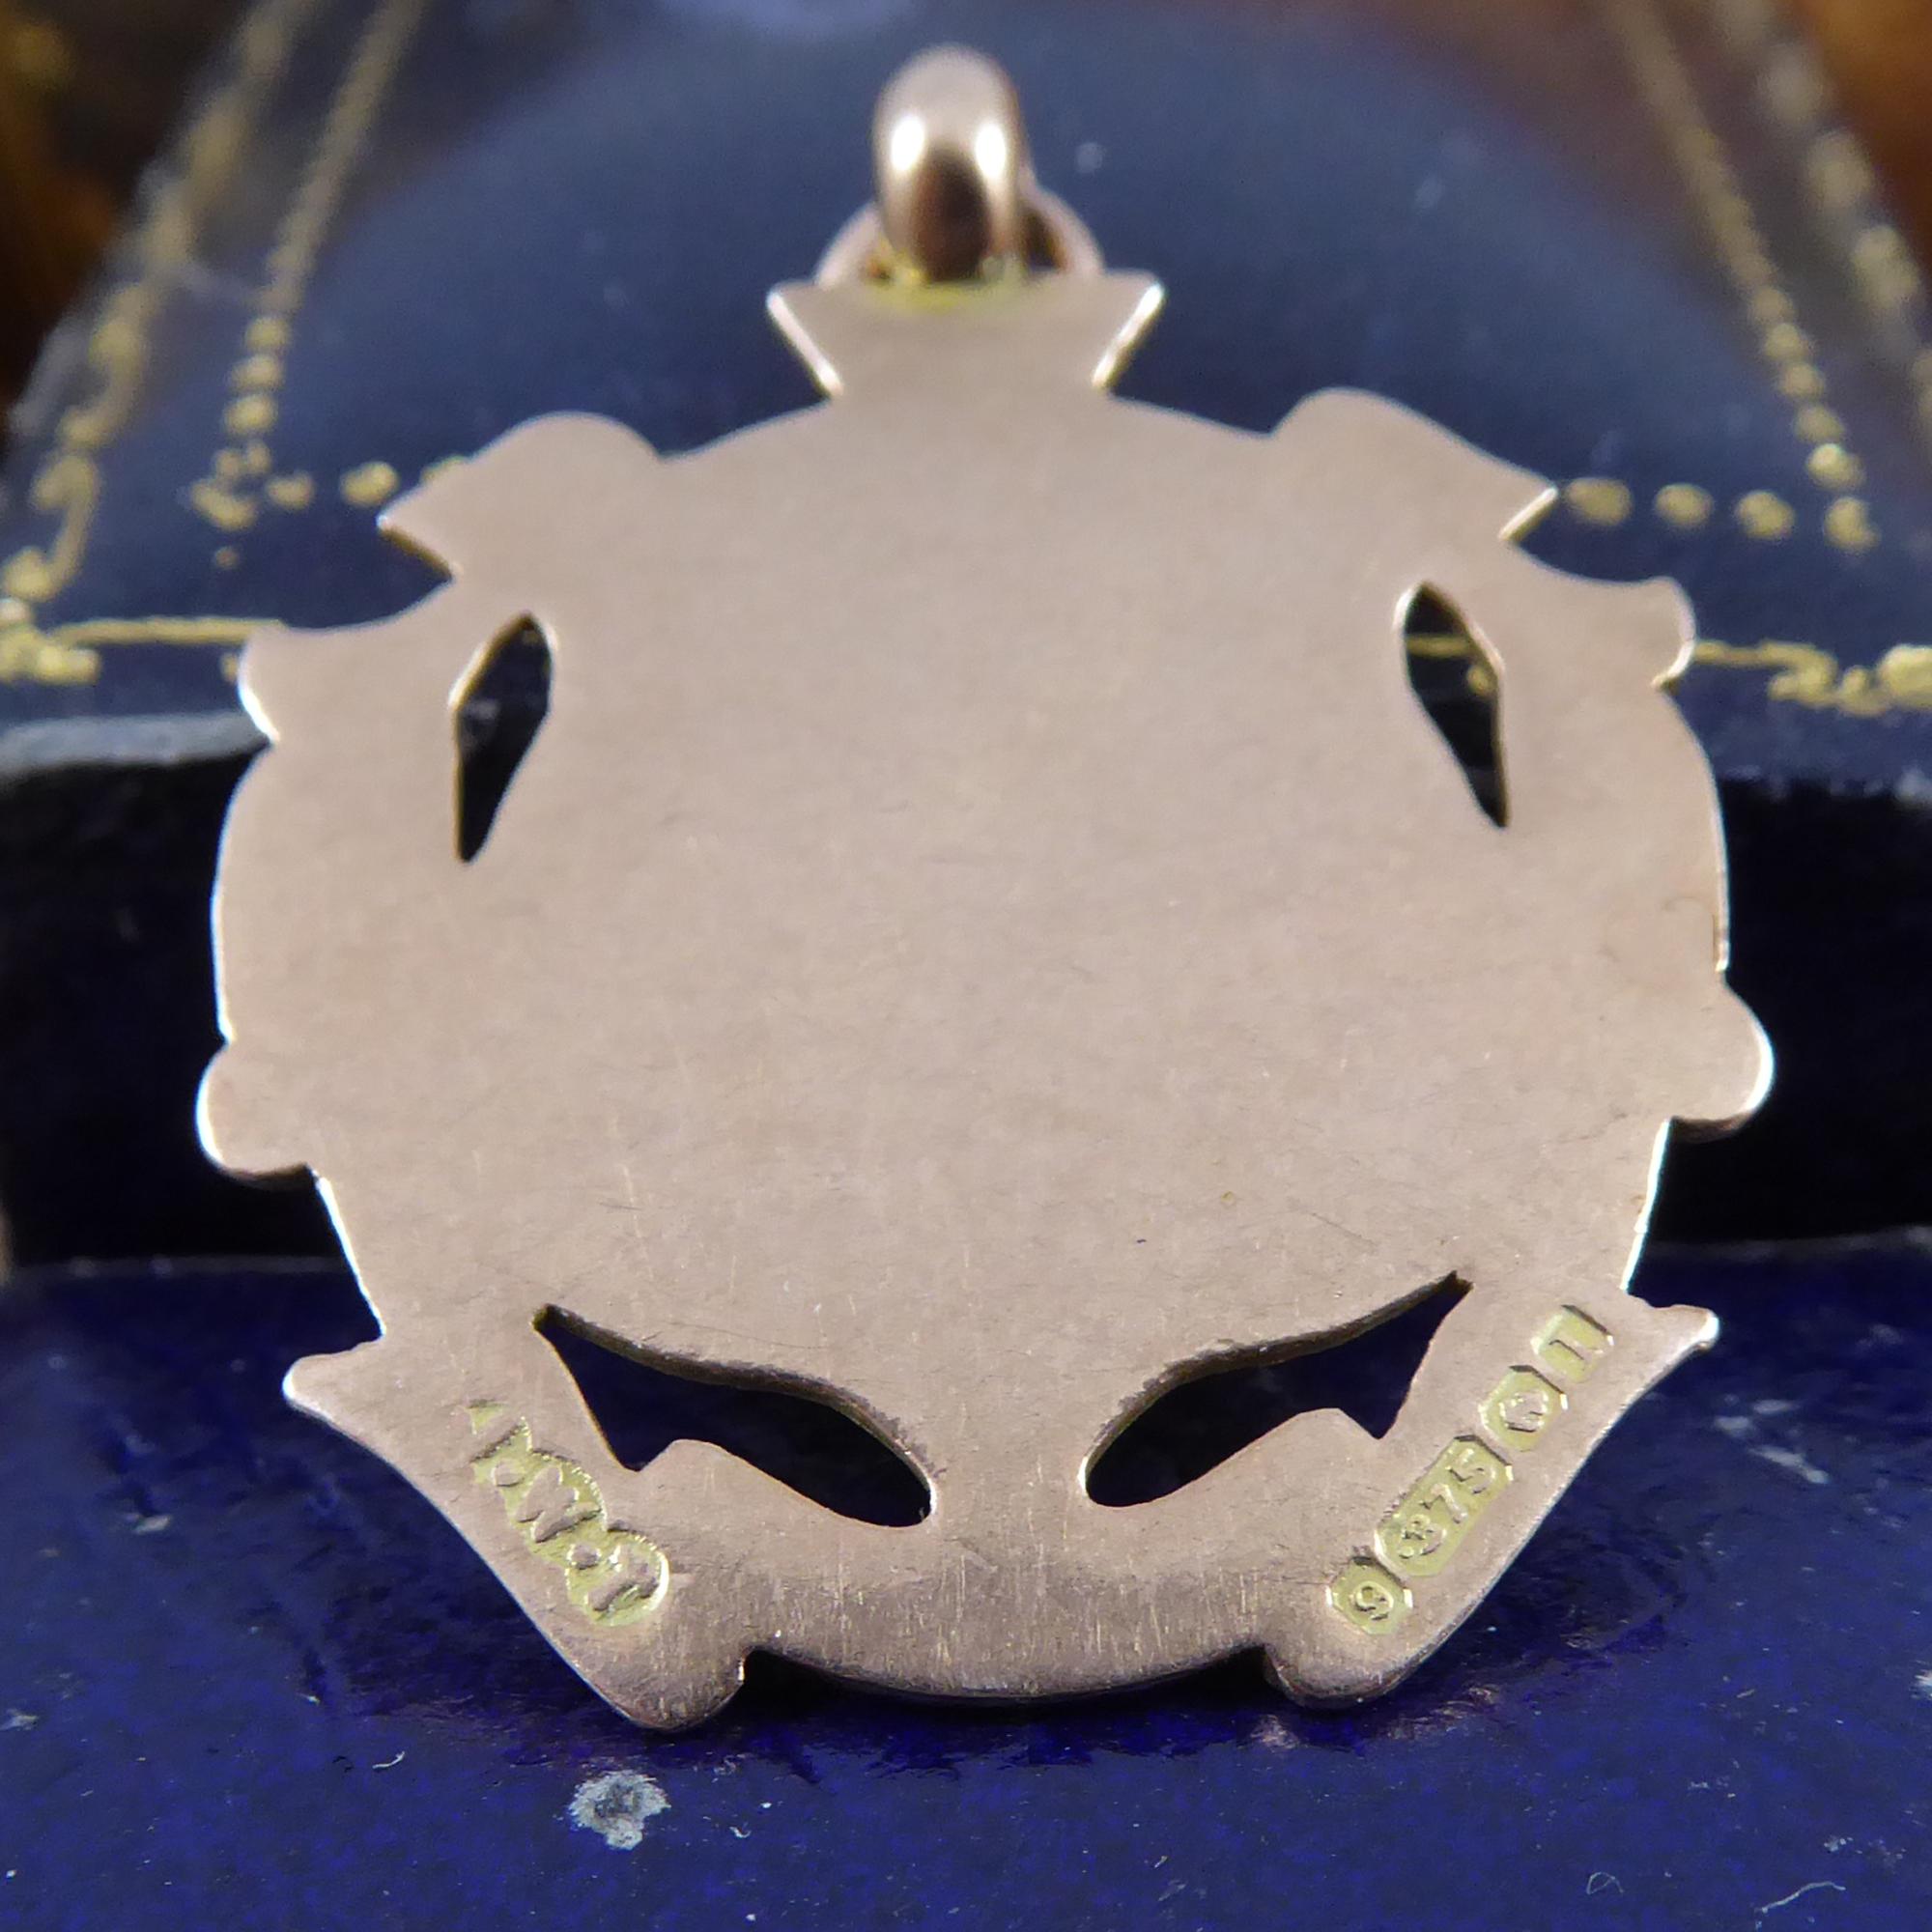 An antique Albert shield suitable for wearing with a pocket watch or added to chain and worn as a pendant.  The Albert has been crafted in 9ct rose gold and features a shield monogrammed with the intitials AW.  The shield has been applied to a